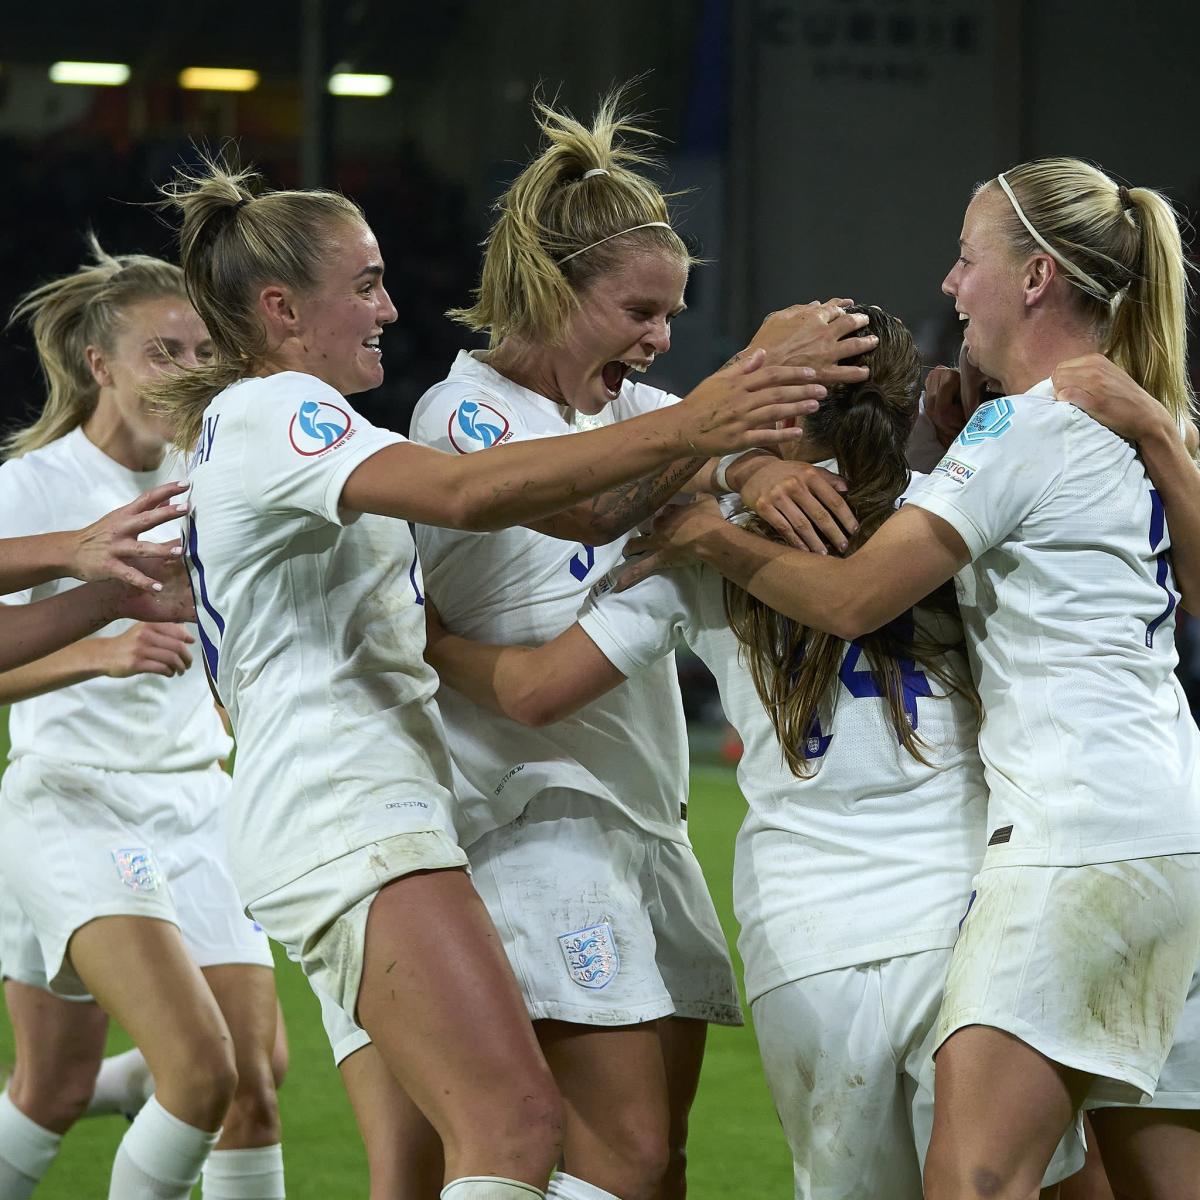 England celebrates, hoping end to decades of soccer pain kicks off new era for women's sports